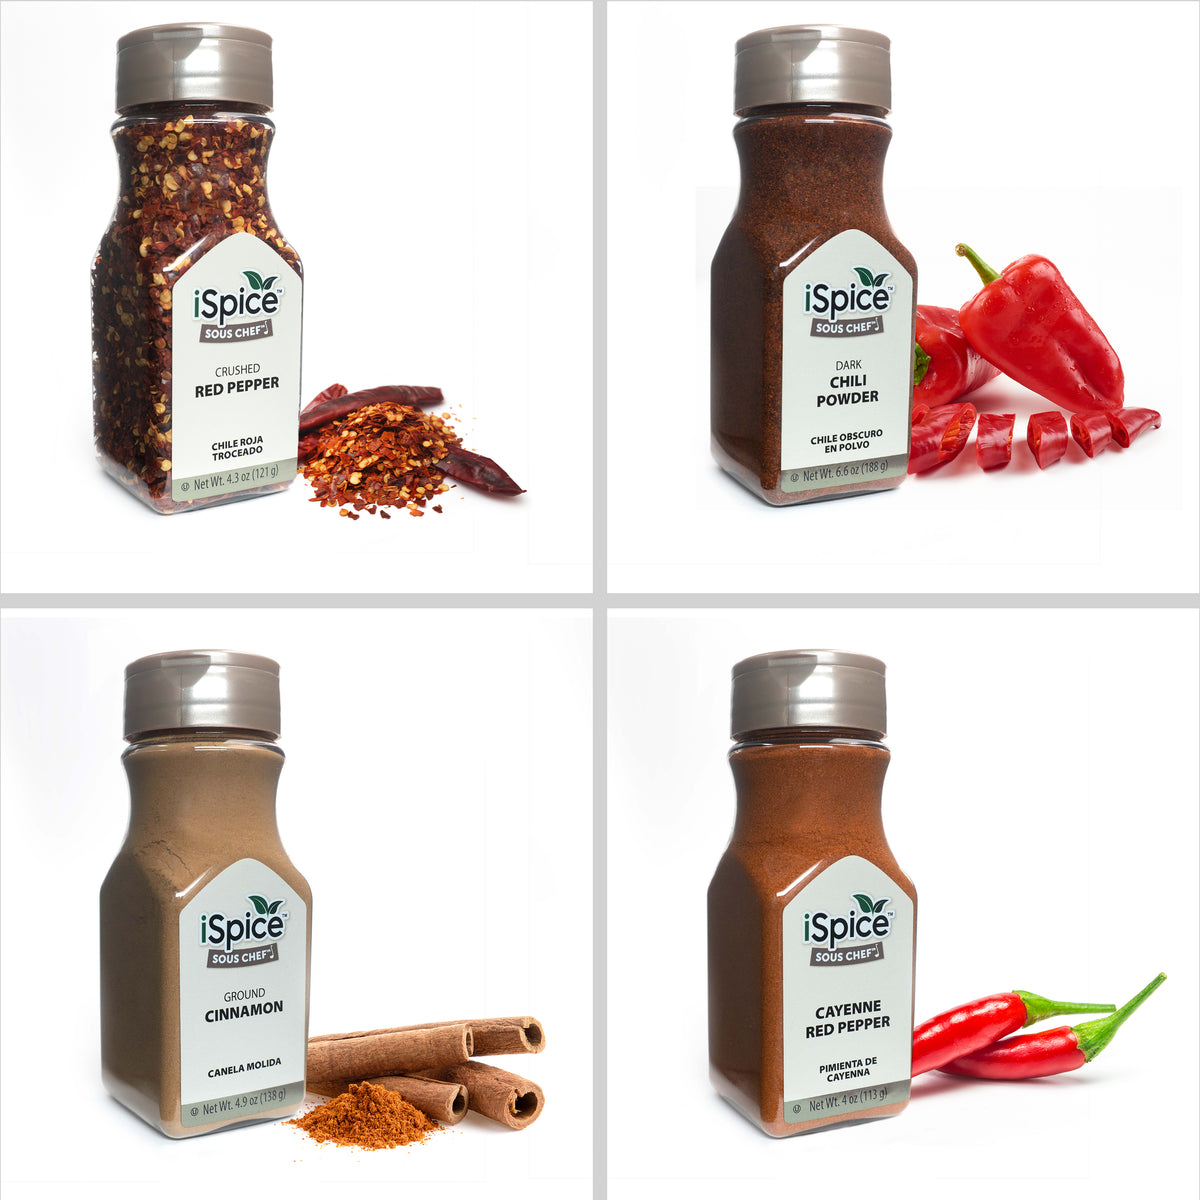 Get ready to craft delicious dishes with our Top 12 Starter Spice Set from Kitchenmist! Add all the perfect herbs and spices to your recipes for amazing flavor.